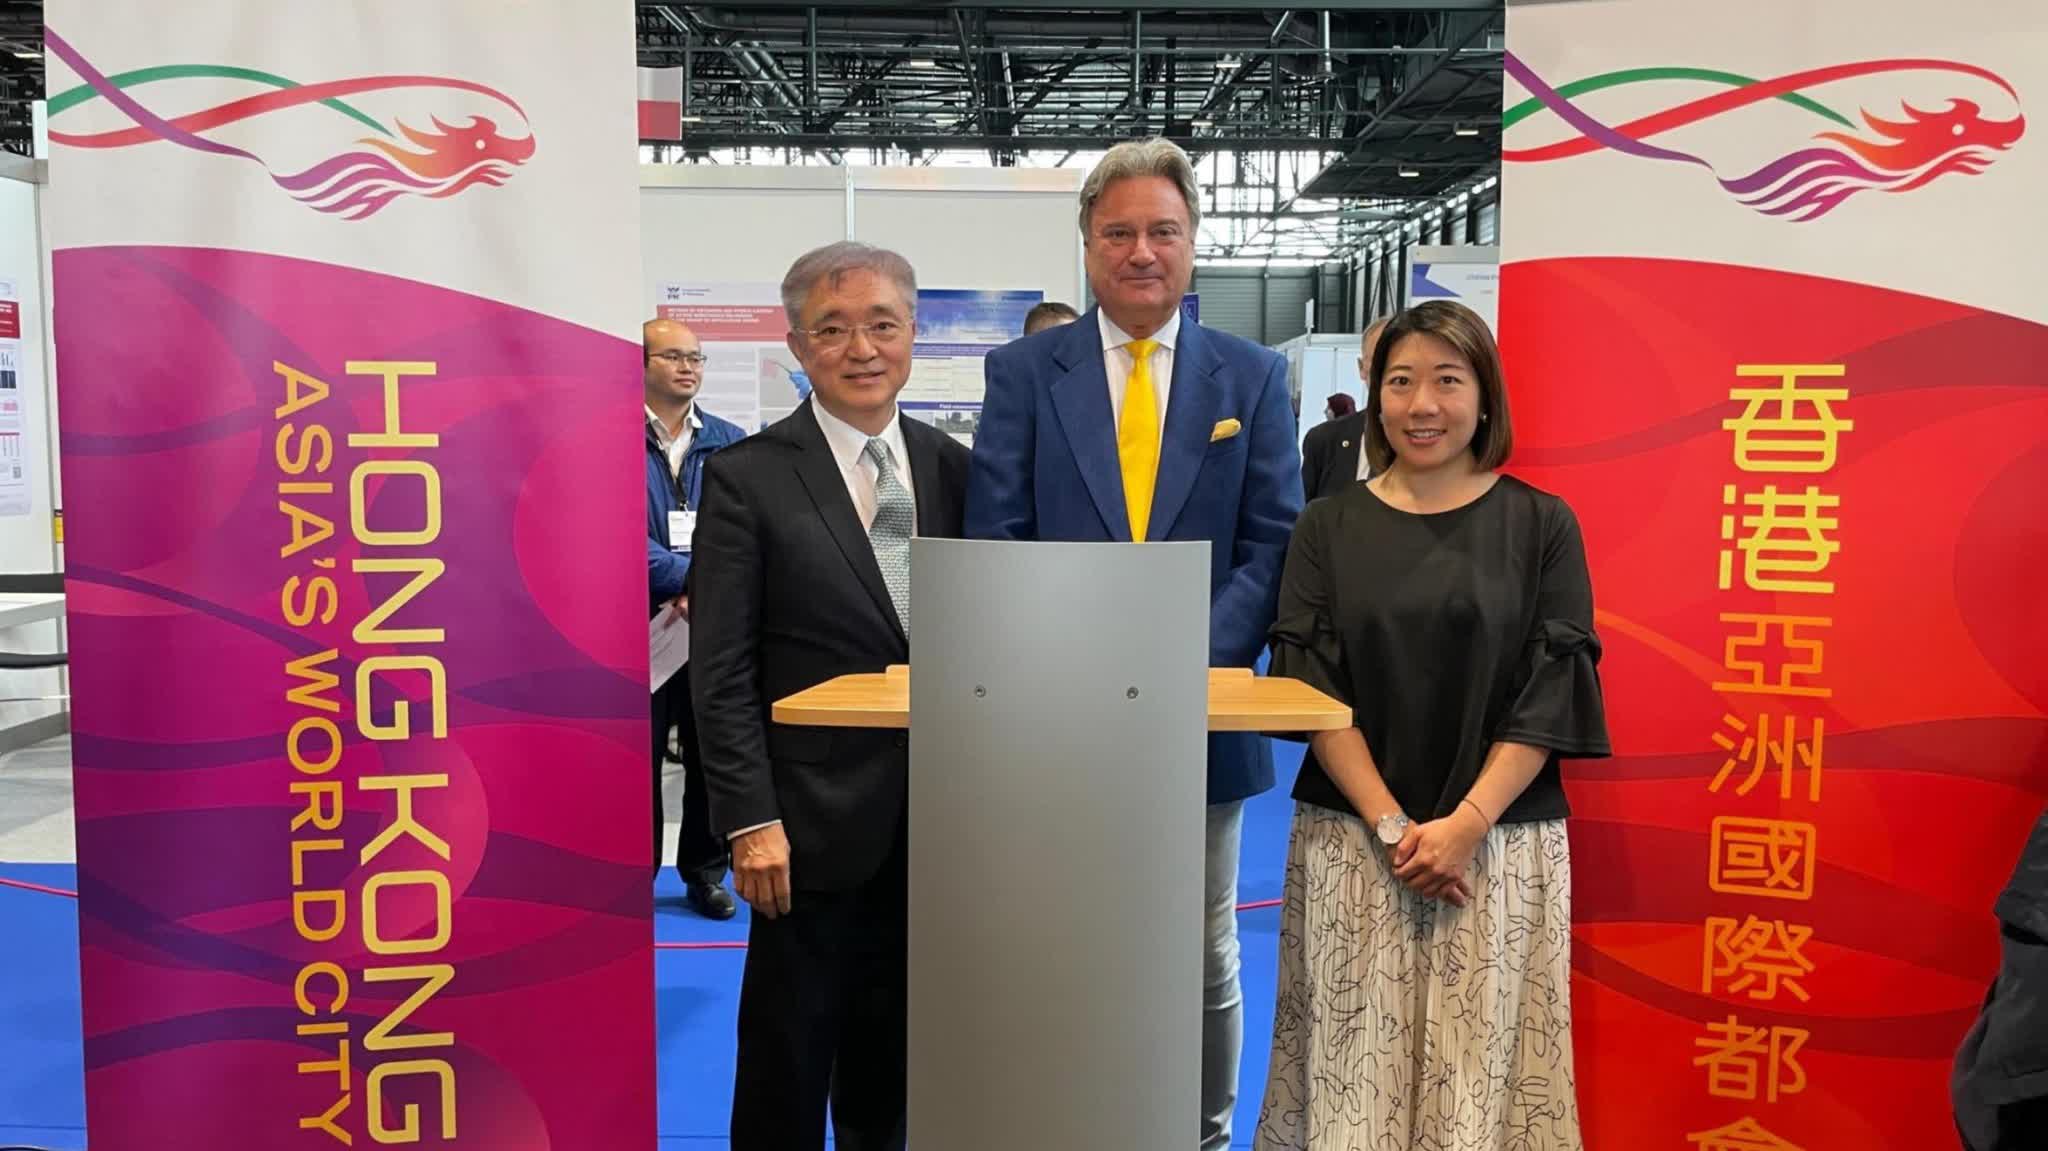 HK presents innovative projects at international invention expo in Geneva